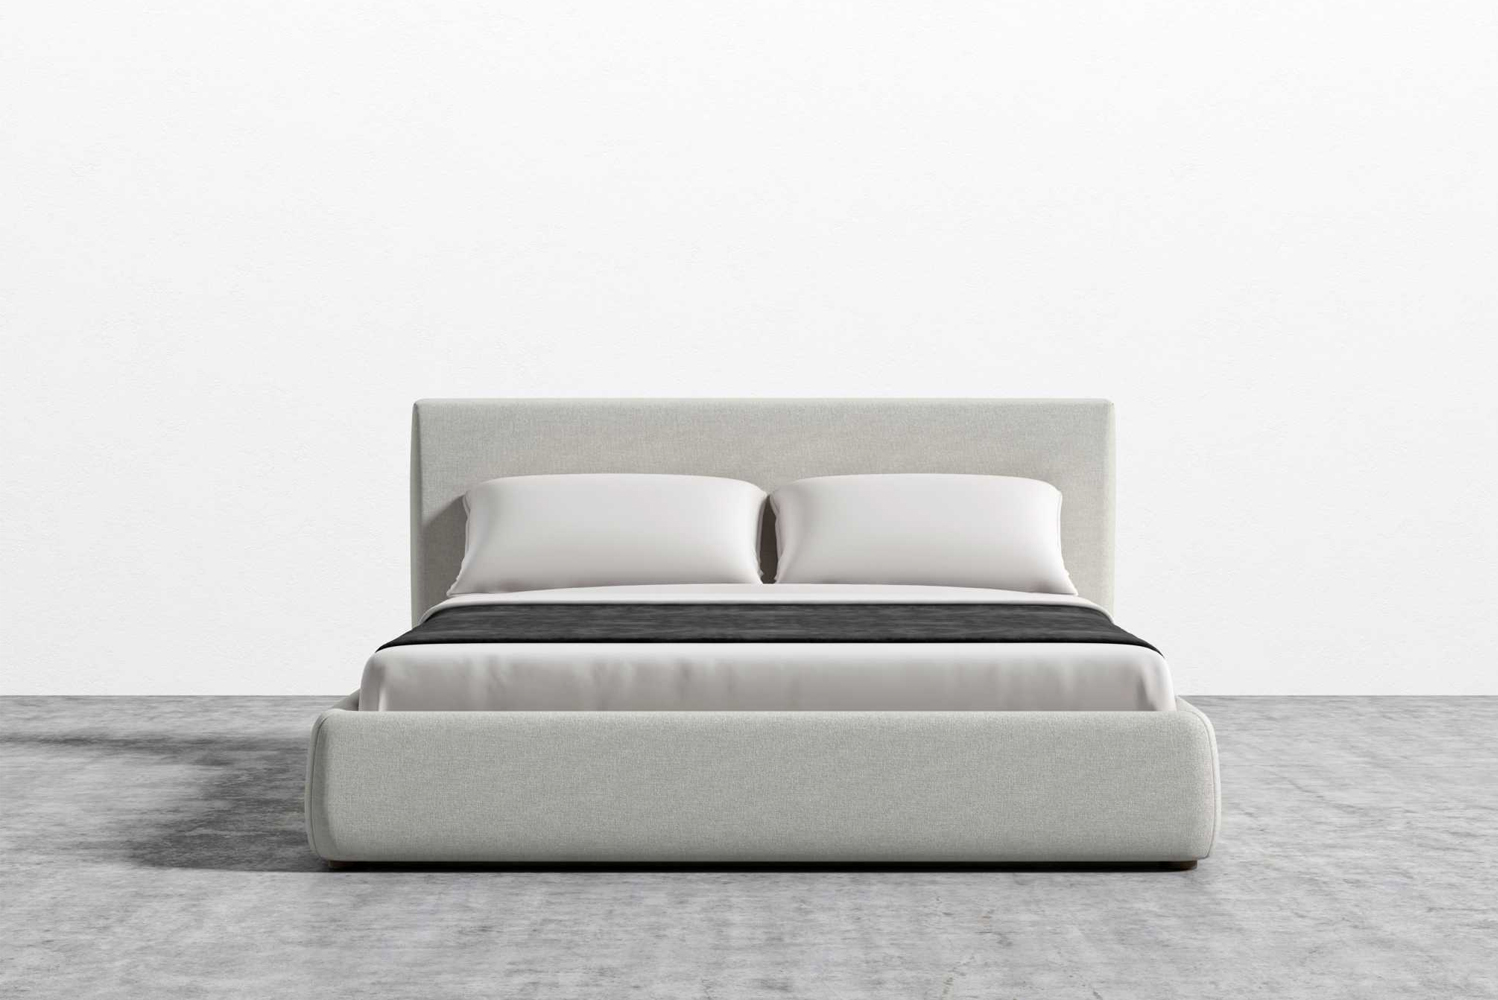 Rove Concepts announced the Ophelia a bed frame with smooth upholstery plush cushioning and rounded edges 